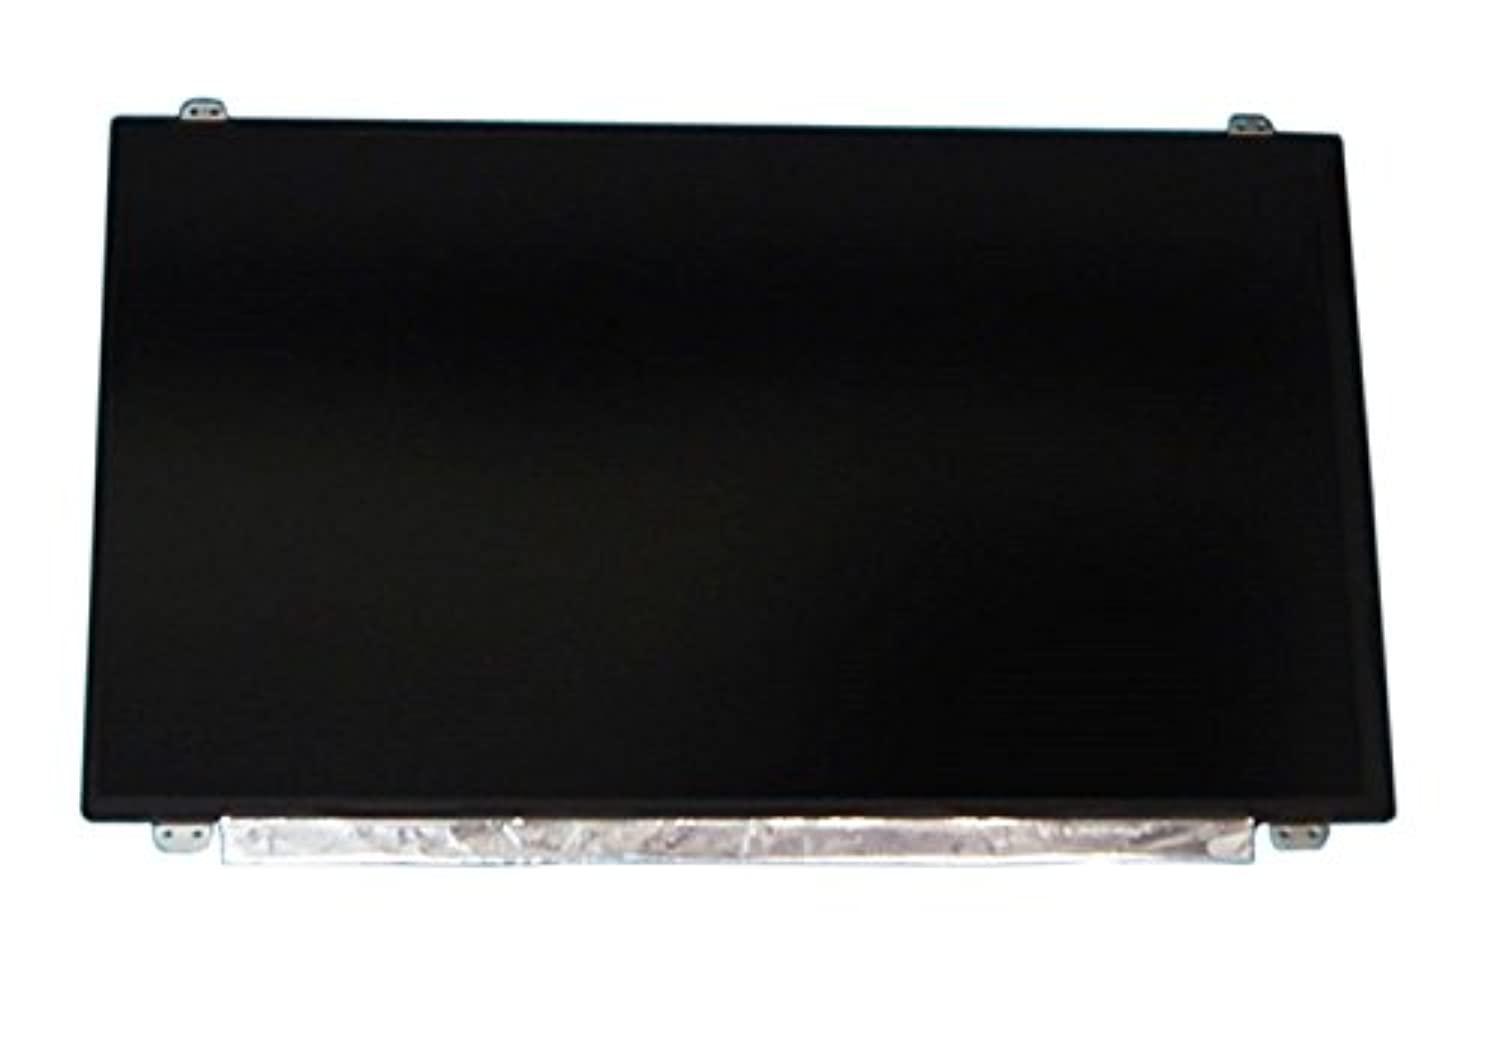 kreplacement 15.6" lcd led screen replacement for acer aspire e 15 e5-575g-53vg 1920x1080 fhd repair display